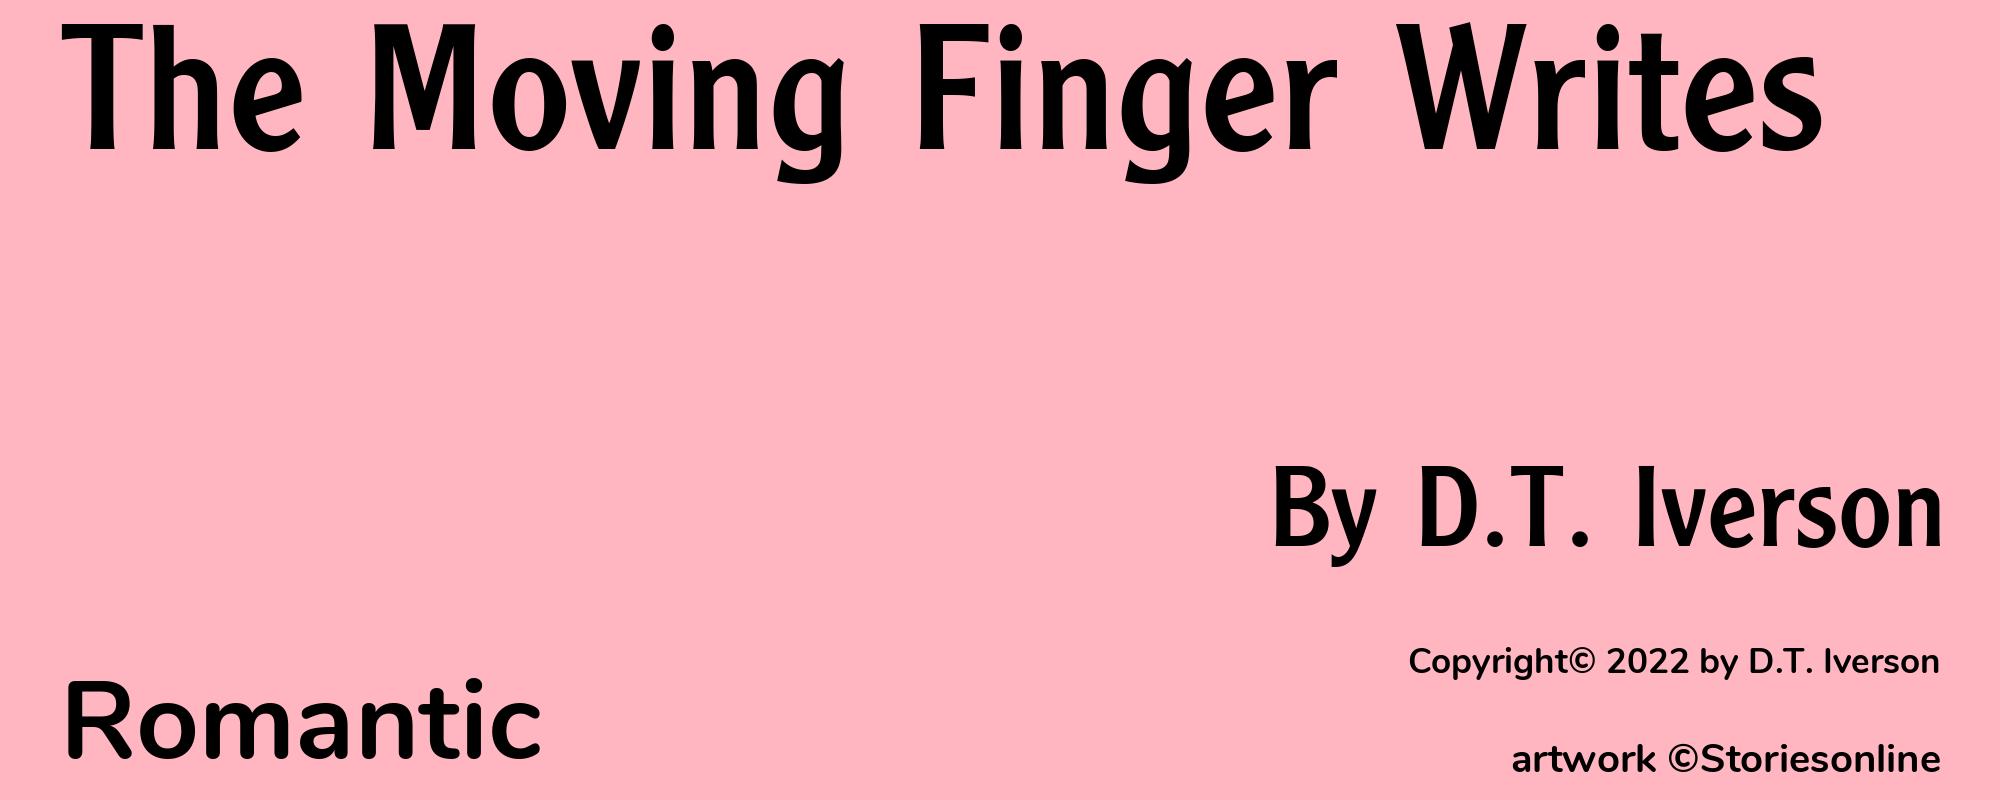 The Moving Finger Writes - Cover